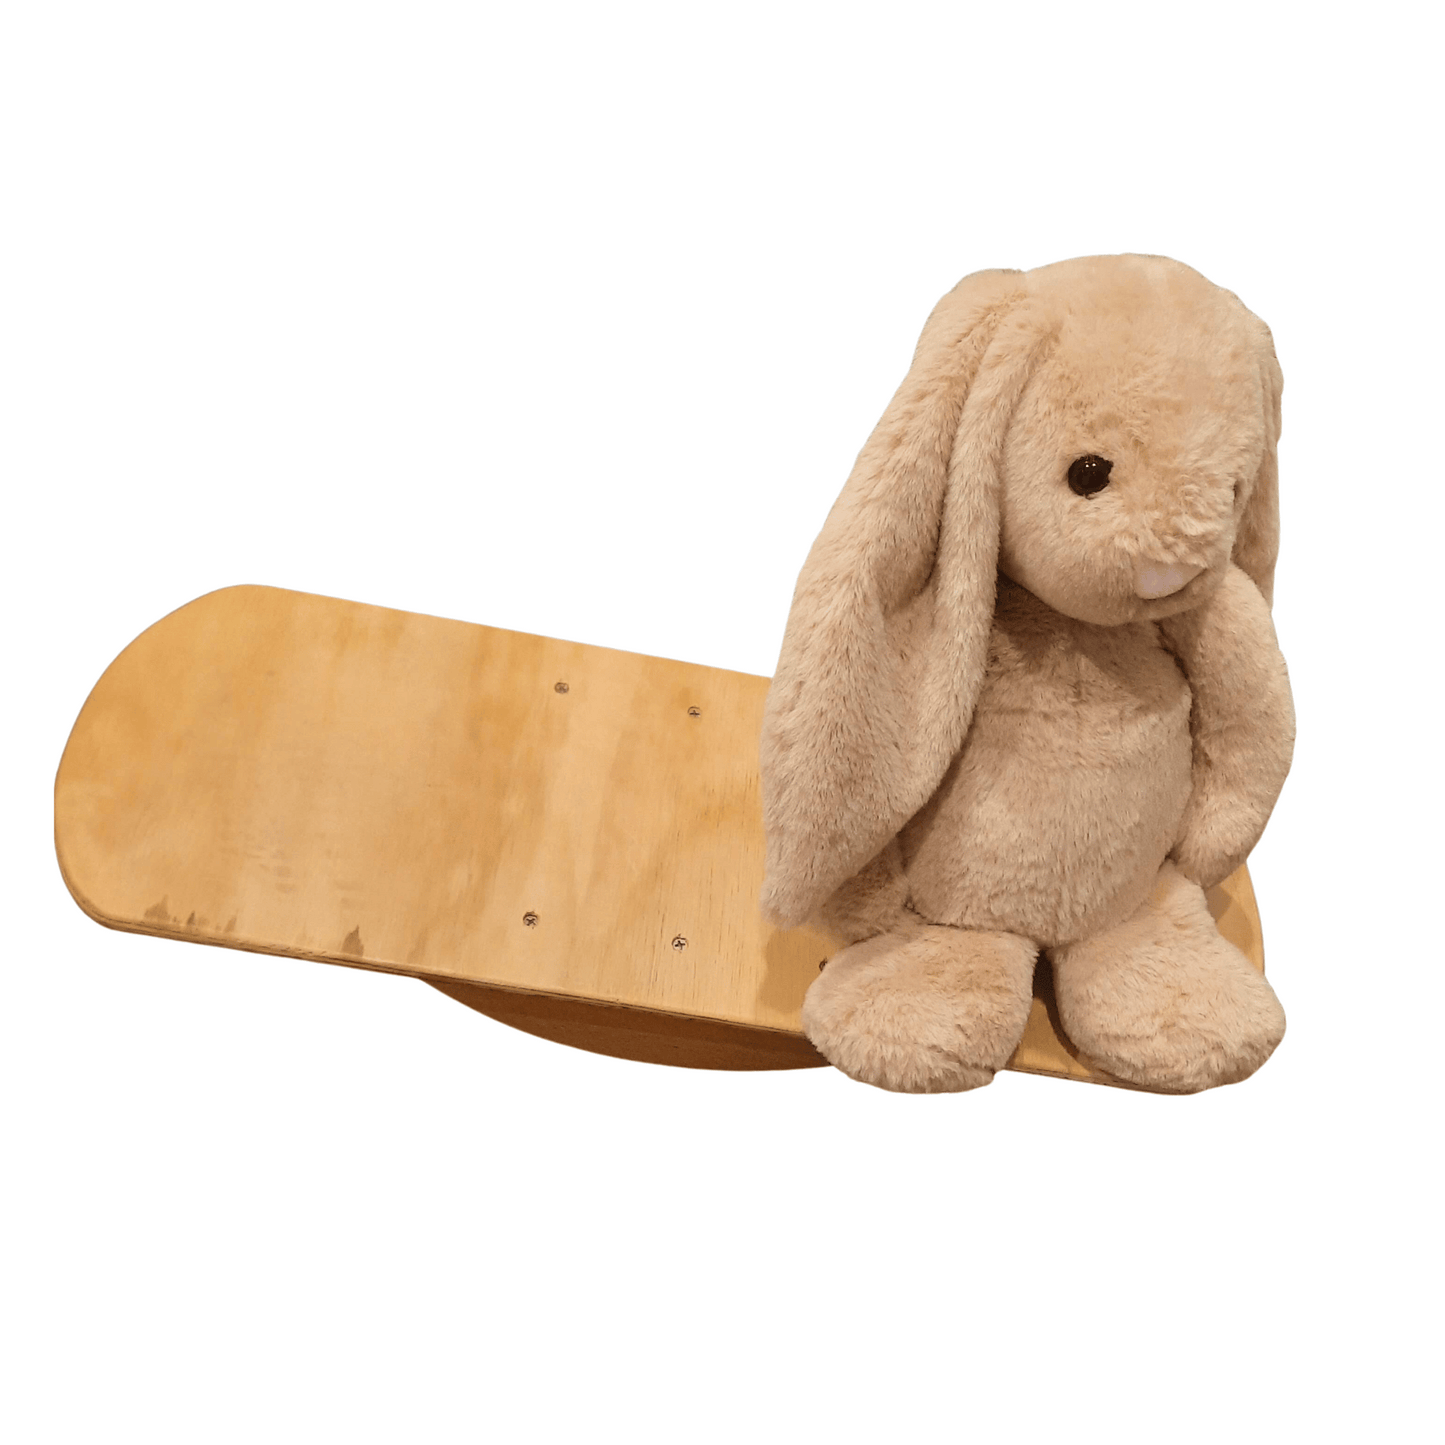 Wooden Balance Board with weighted rabbit